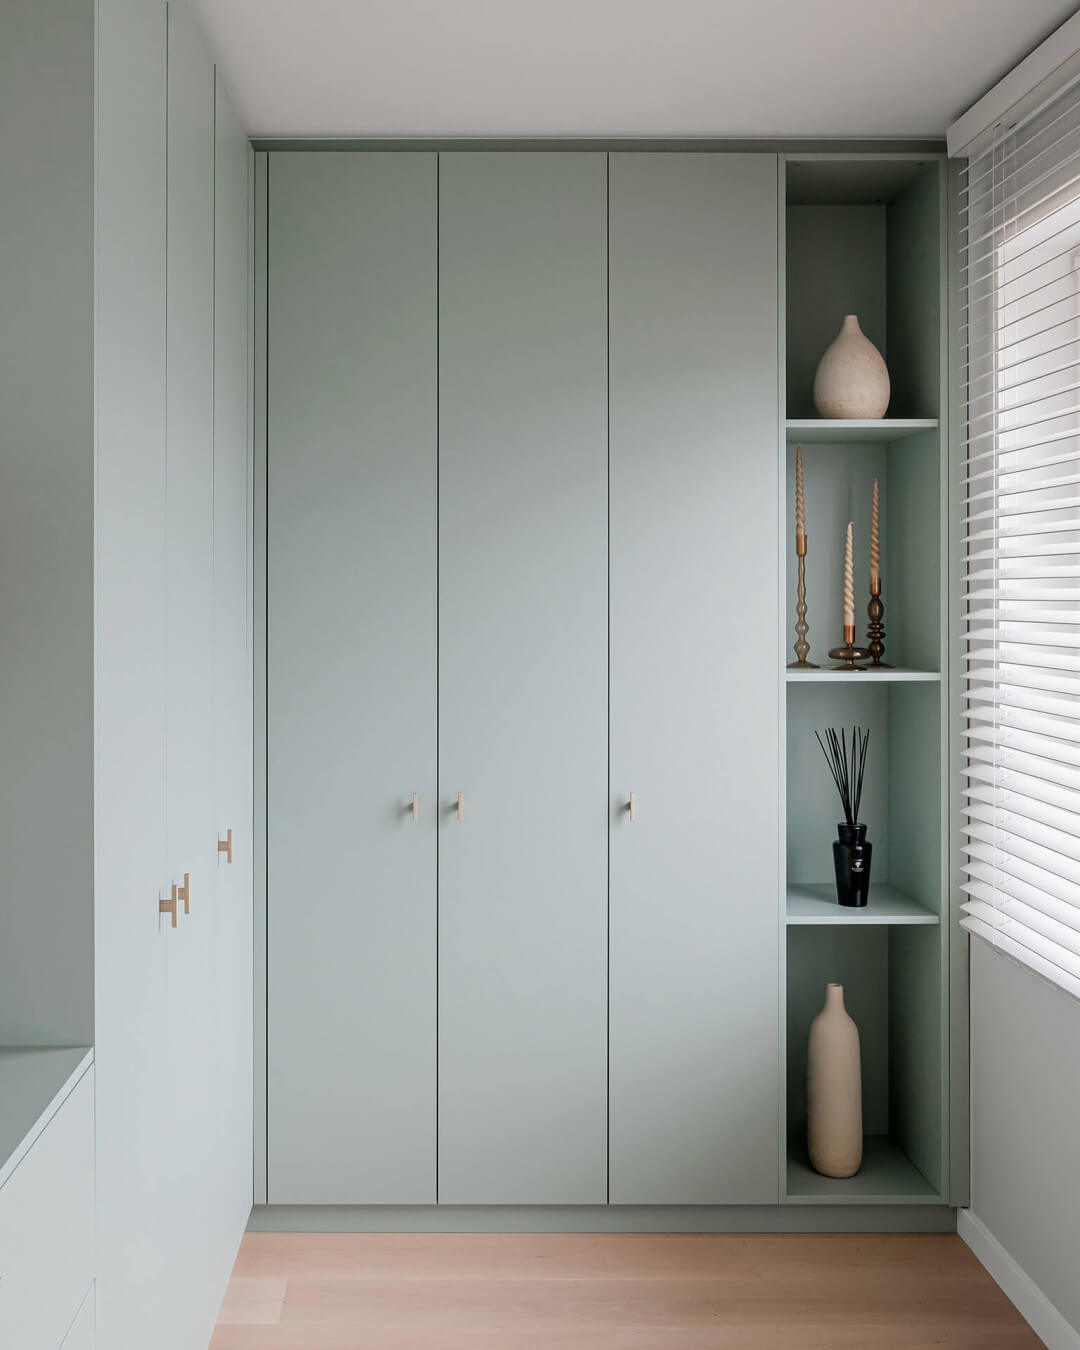 Bespoke cupboard in entrance hall in Industrial Green colour with brass handles